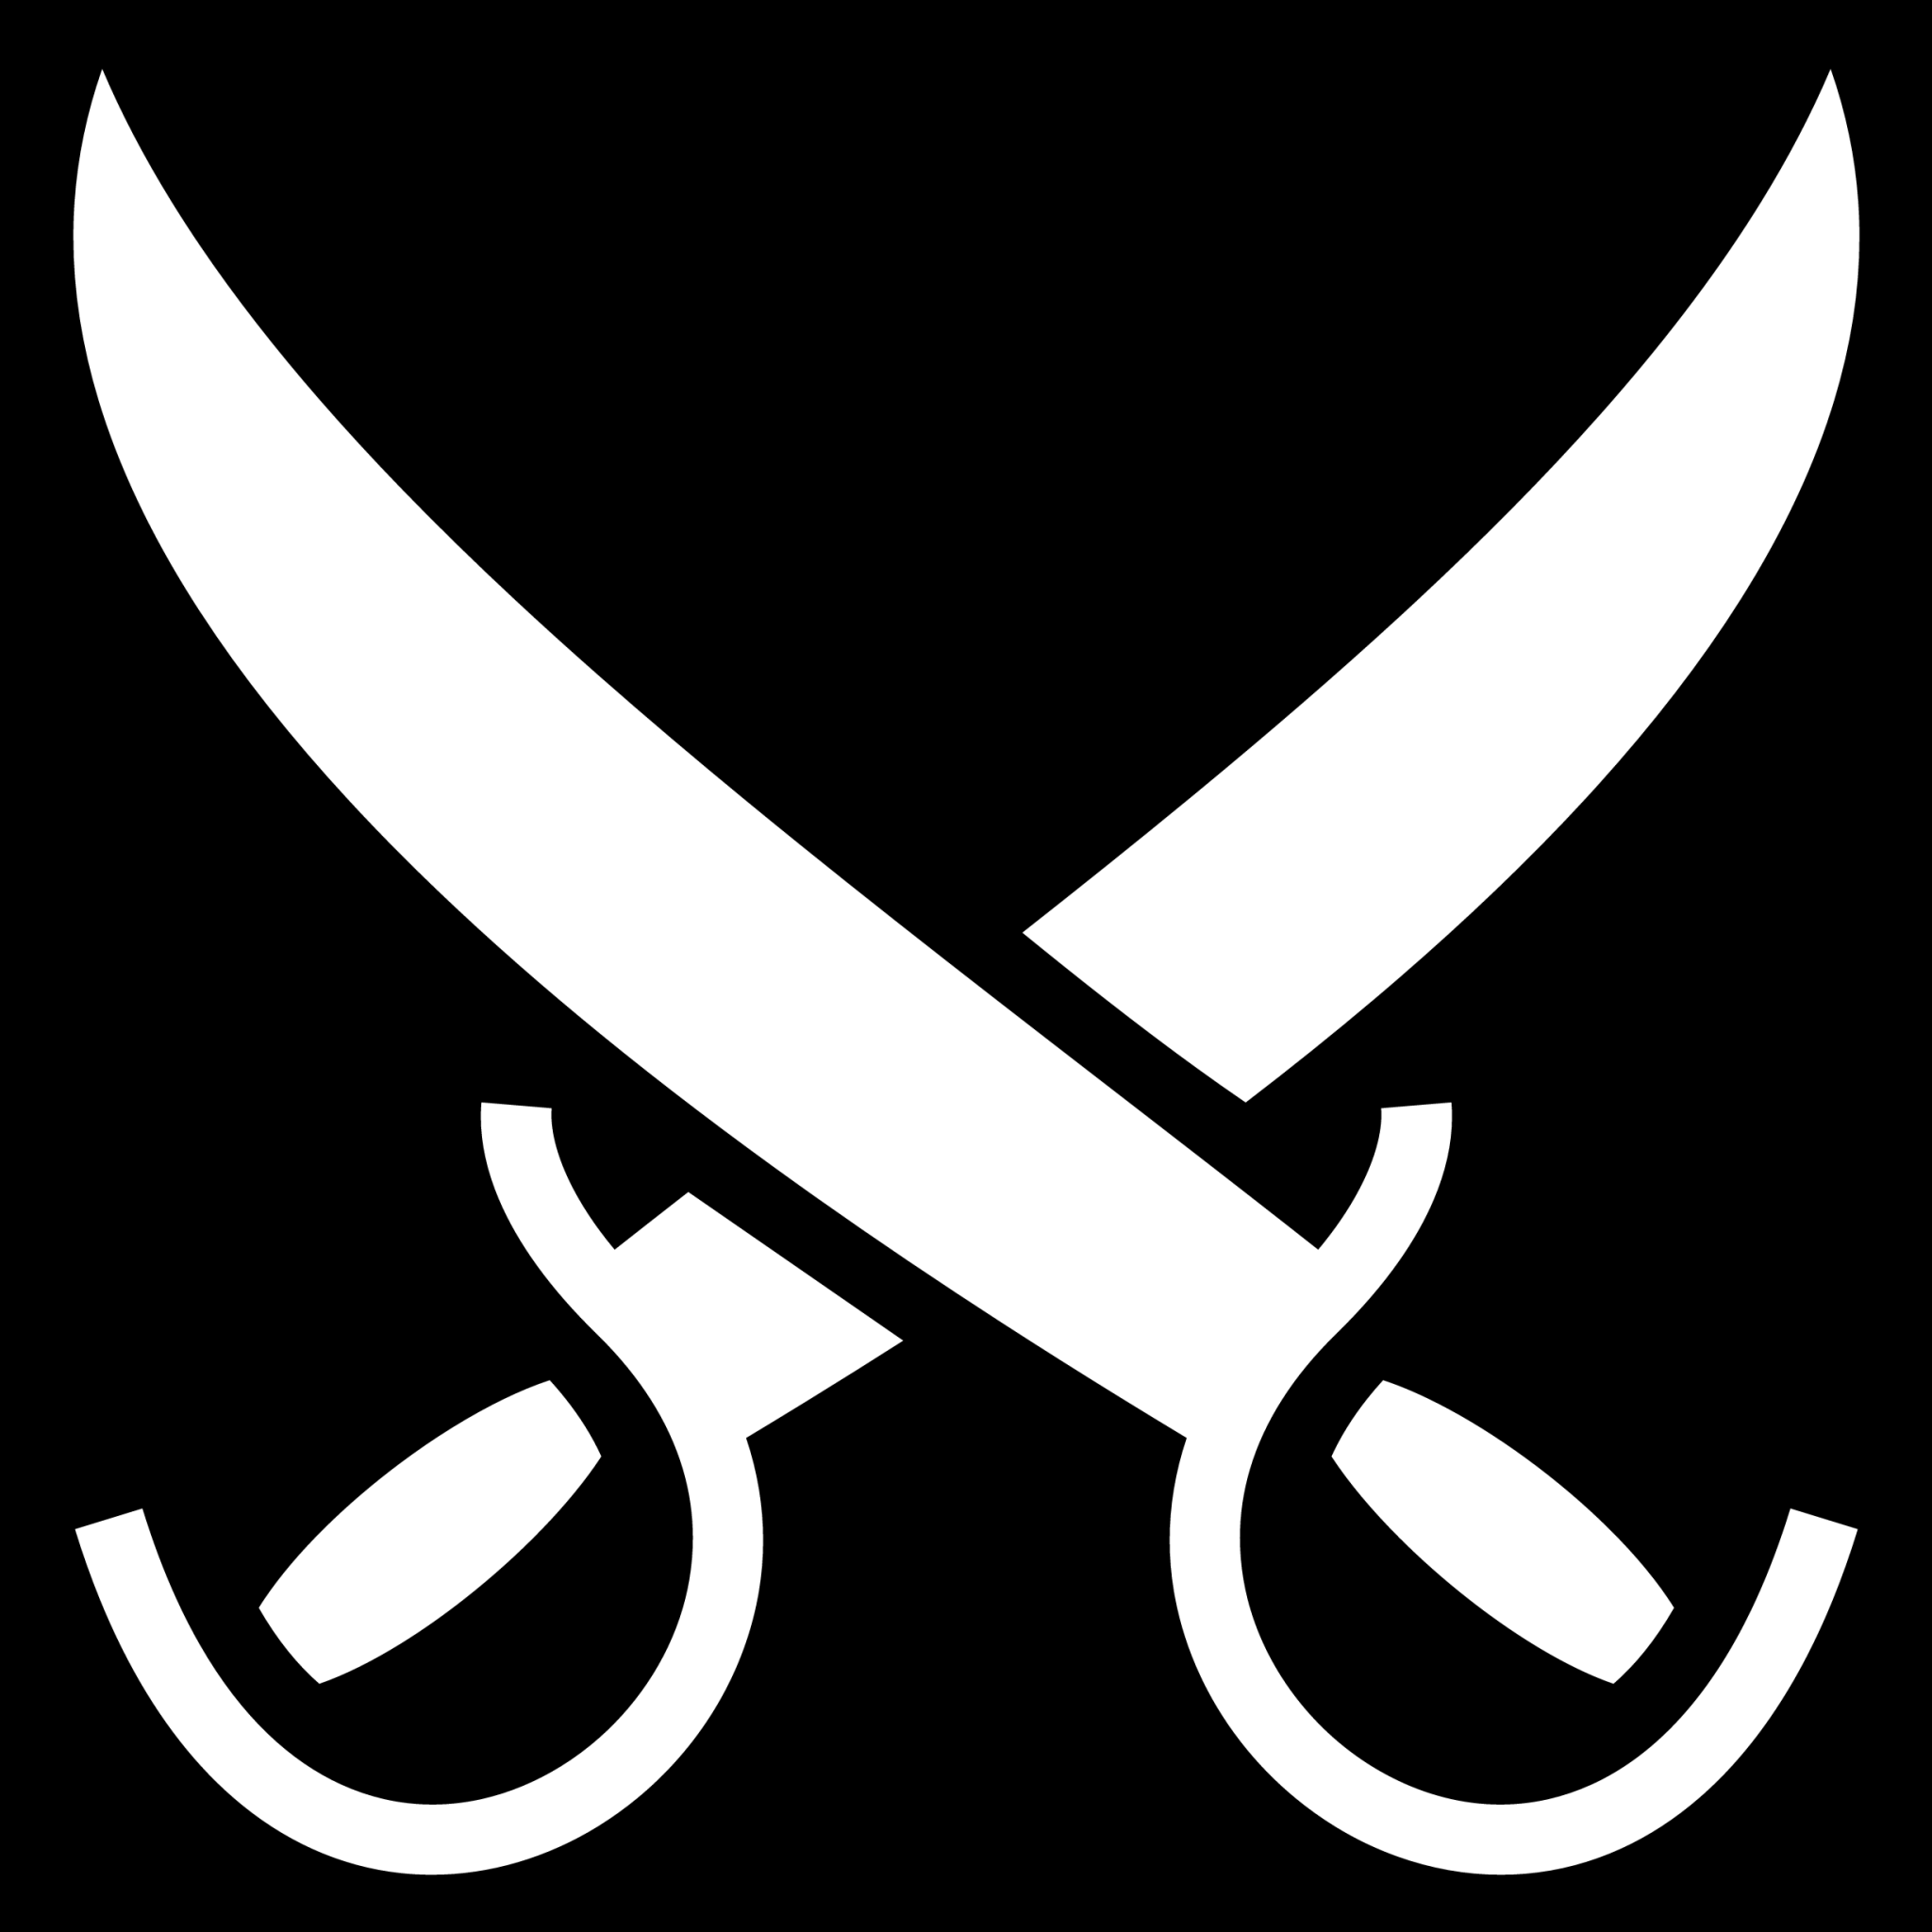 crossed sabres icon